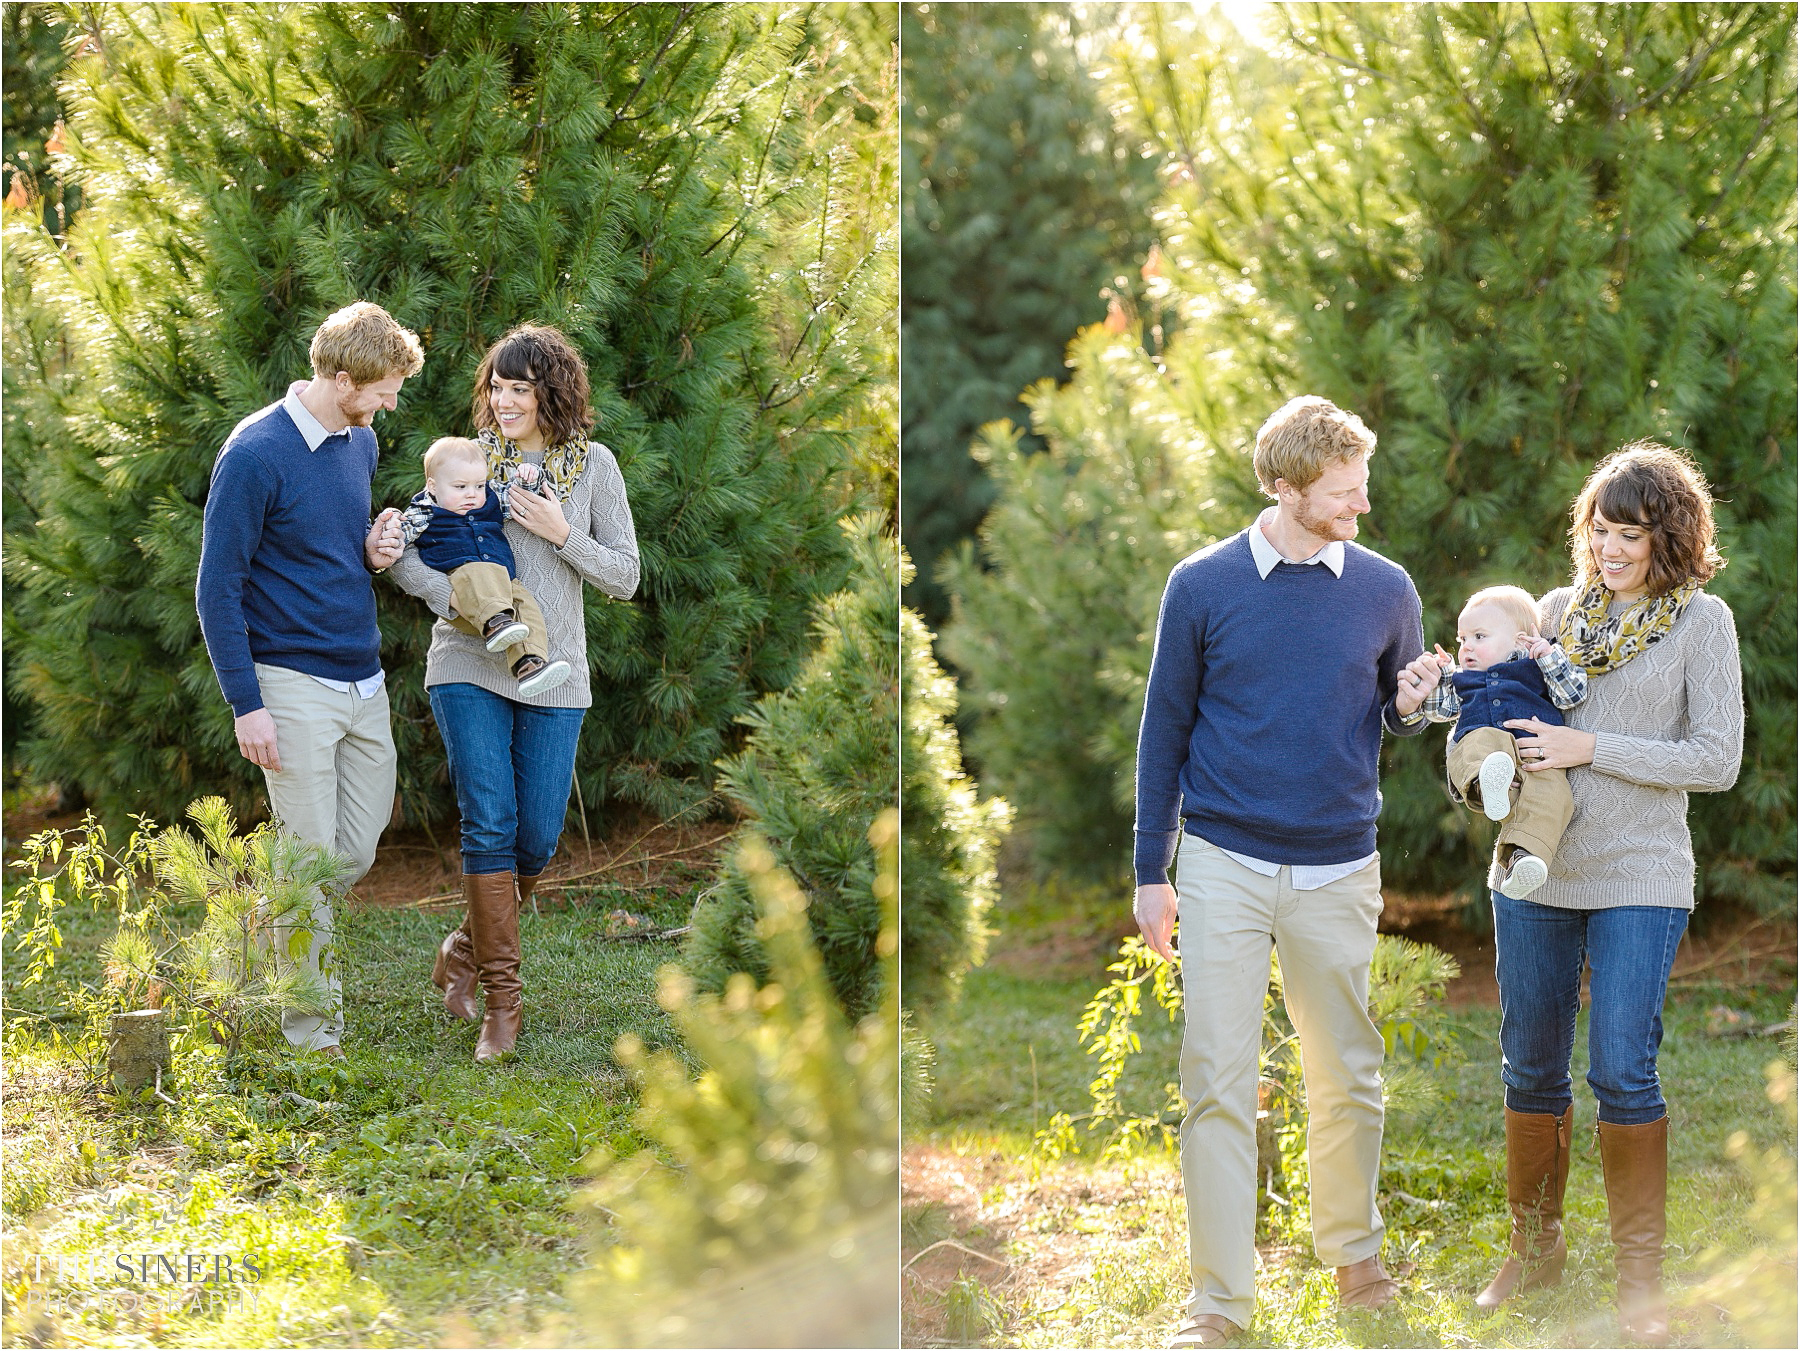 Mahoney Family_Indianapolis Family Photographer_TheSinersPhotography_0022